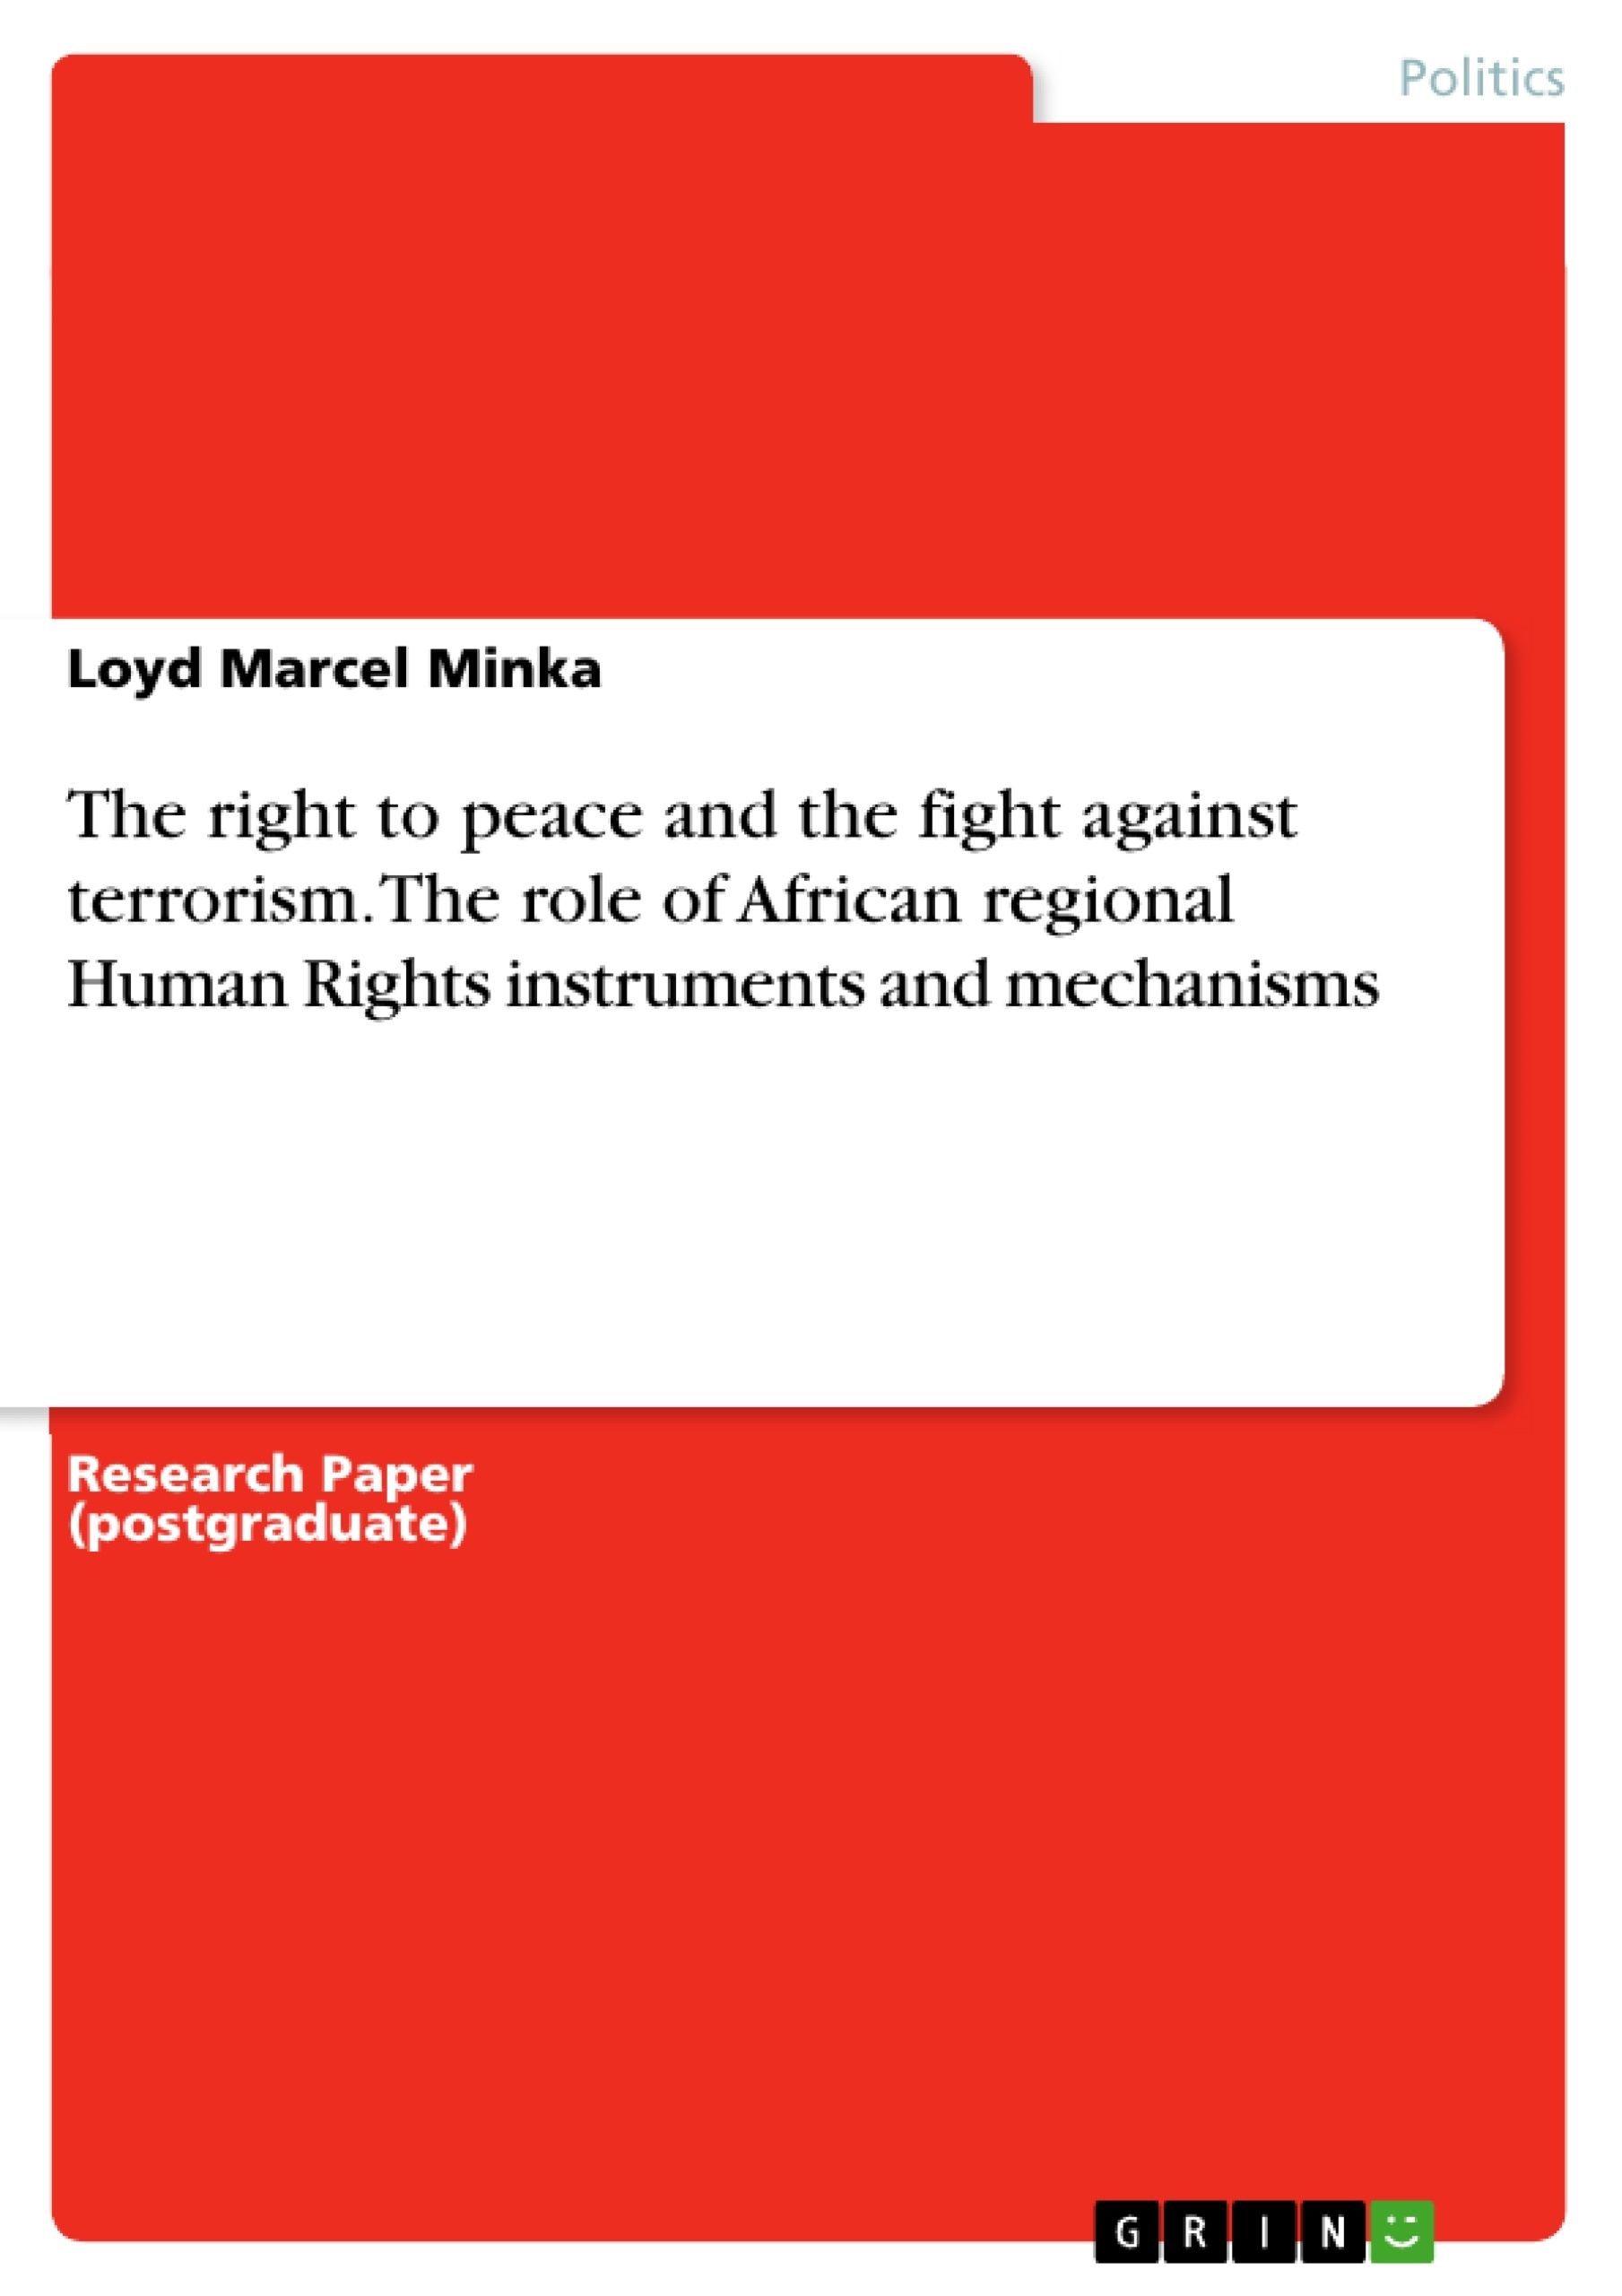 Title: The right to peace and the fight against terrorism. The role of African regional Human Rights instruments and mechanisms